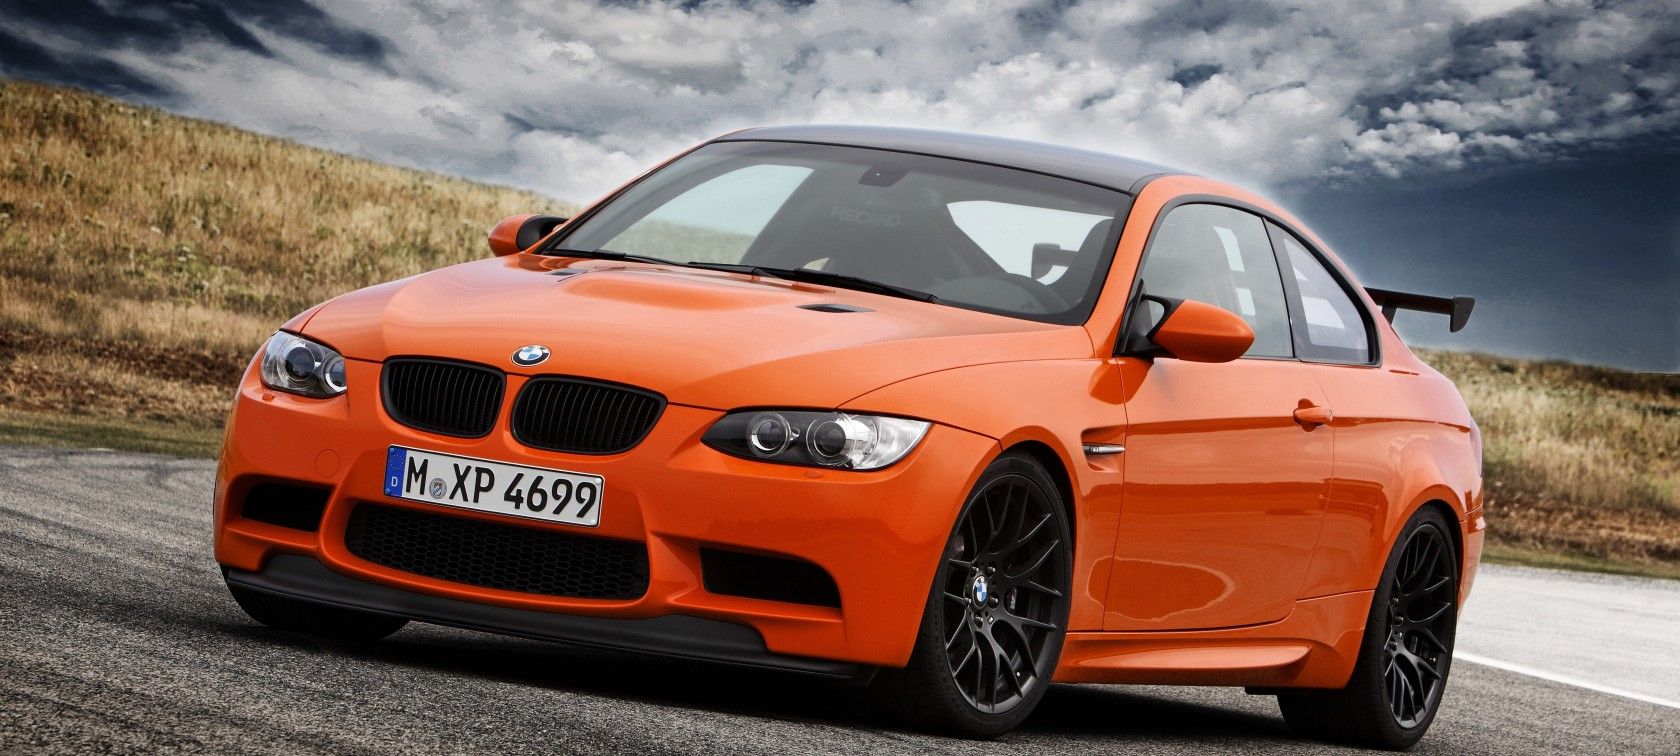 BMW M3 GTS parked outside